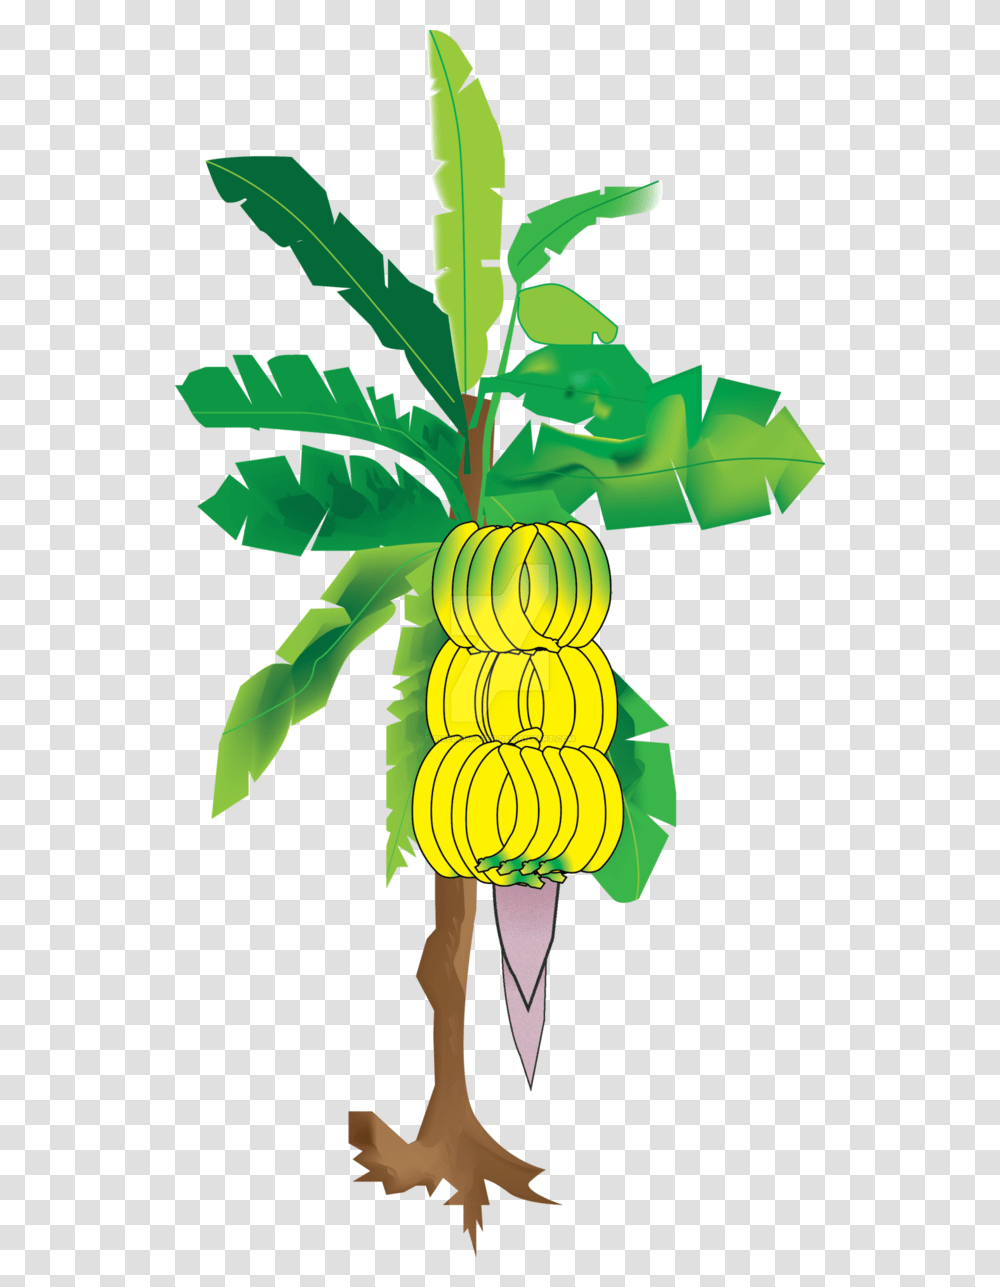 Pictures Of Banana Tree Images For Wedding, Plant, Fruit, Food Transparent Png